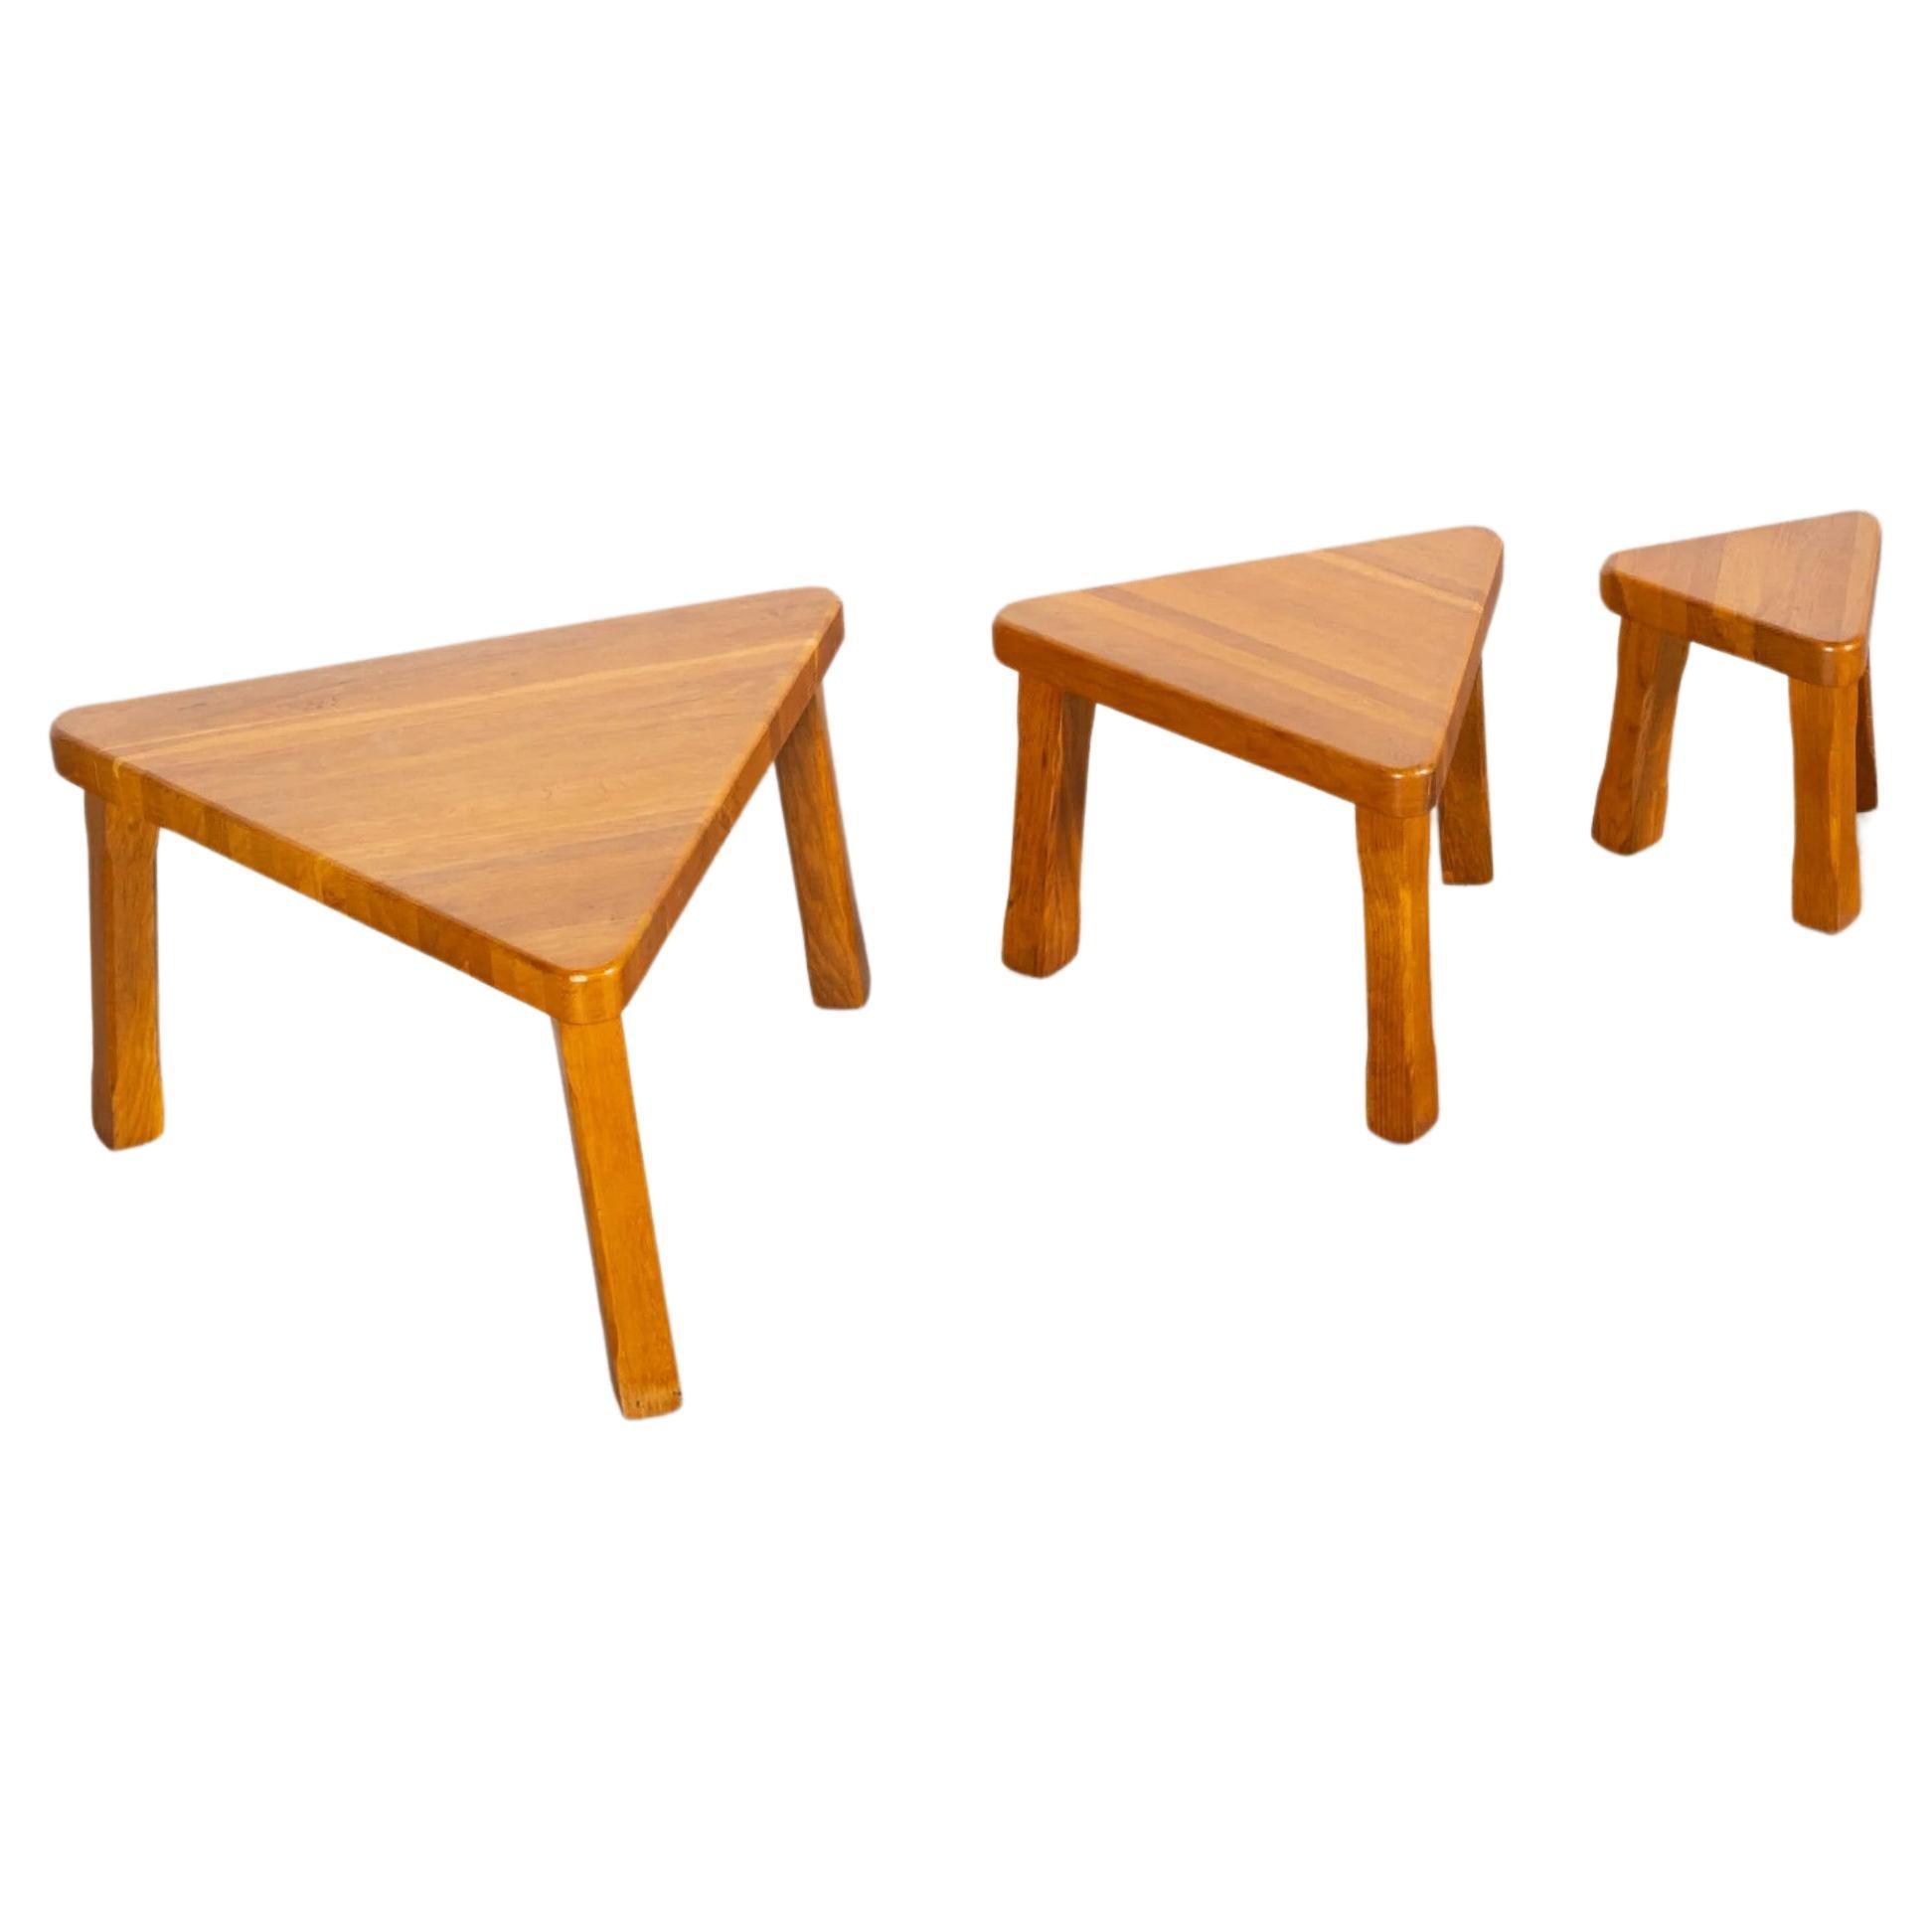 Set of 3 Brutalist Oak Nesting Tables in the Manner of Pierre Chapo